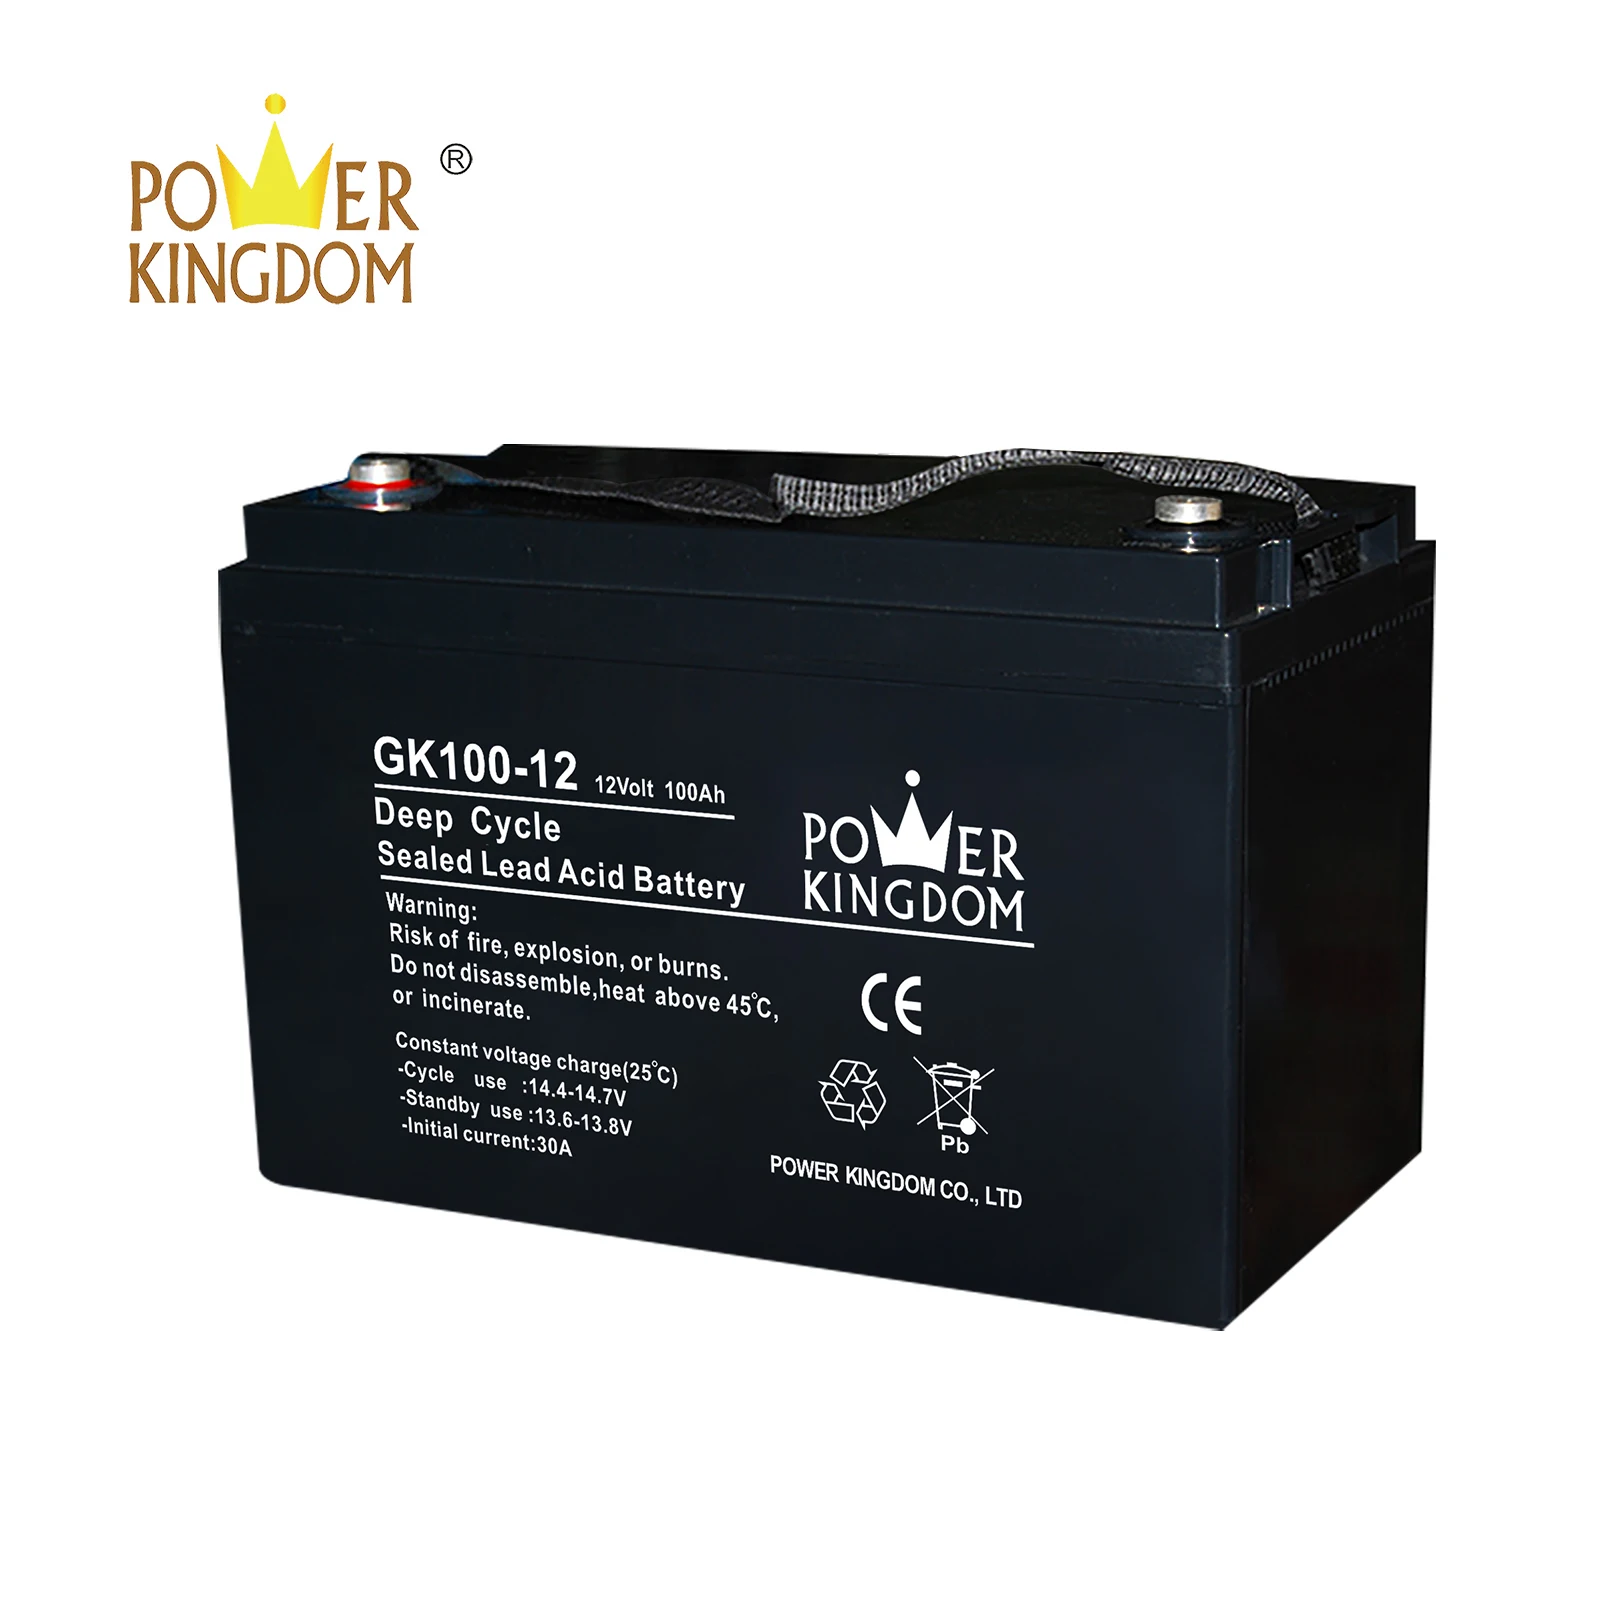 Power Kingdom ups lead acid battery inquire now wind power system